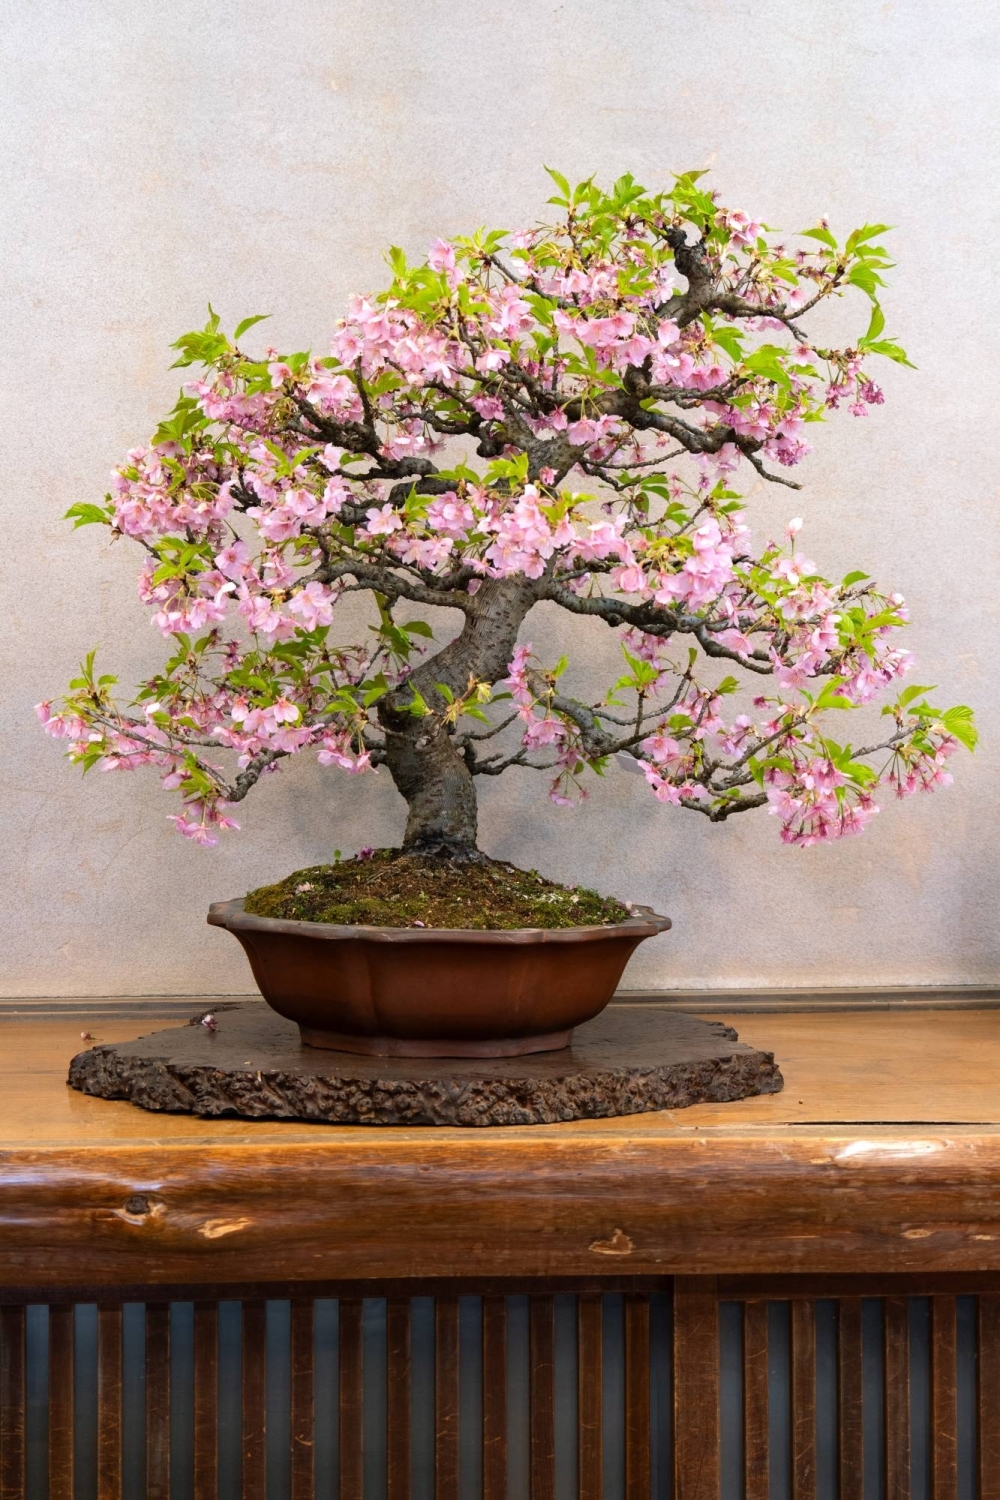 When bonsai was first introduced to Japan, the craft spread through Chinese Zen Buddhist monks who taught in monasteries.